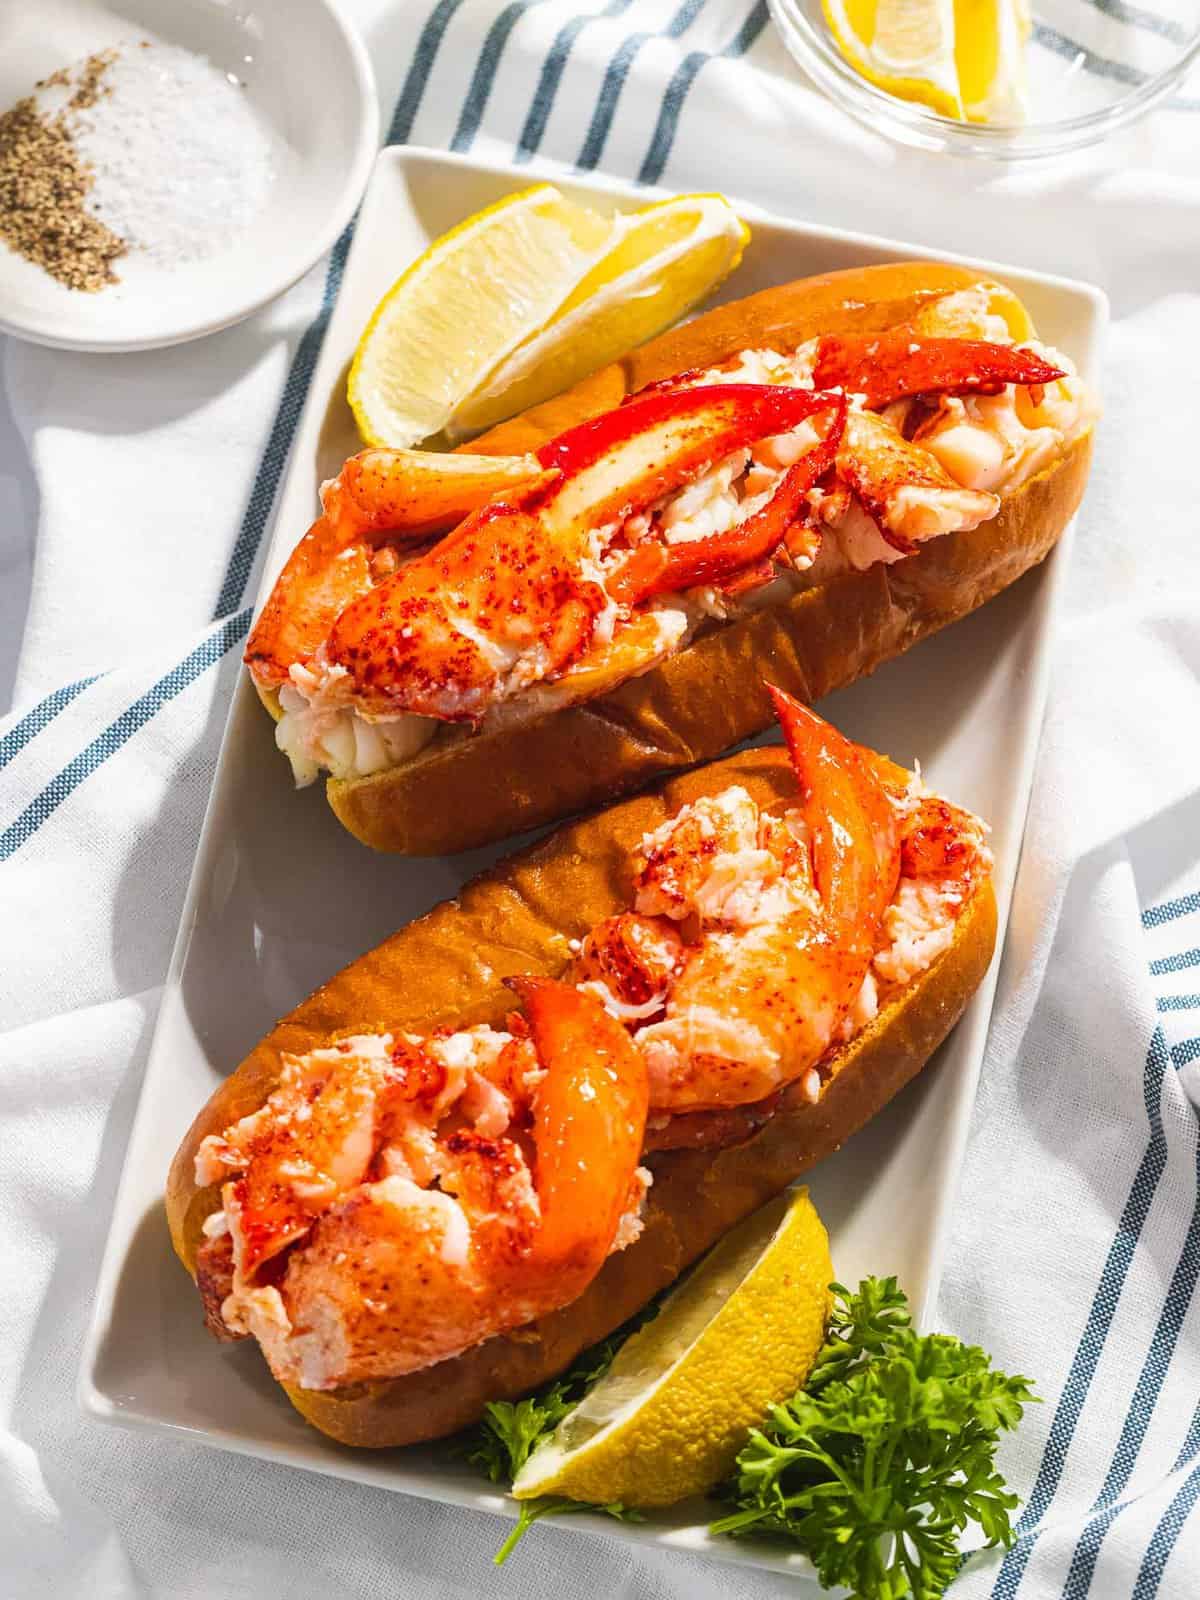 Connecticut-style warm lobster rolls with lobster claw meat.